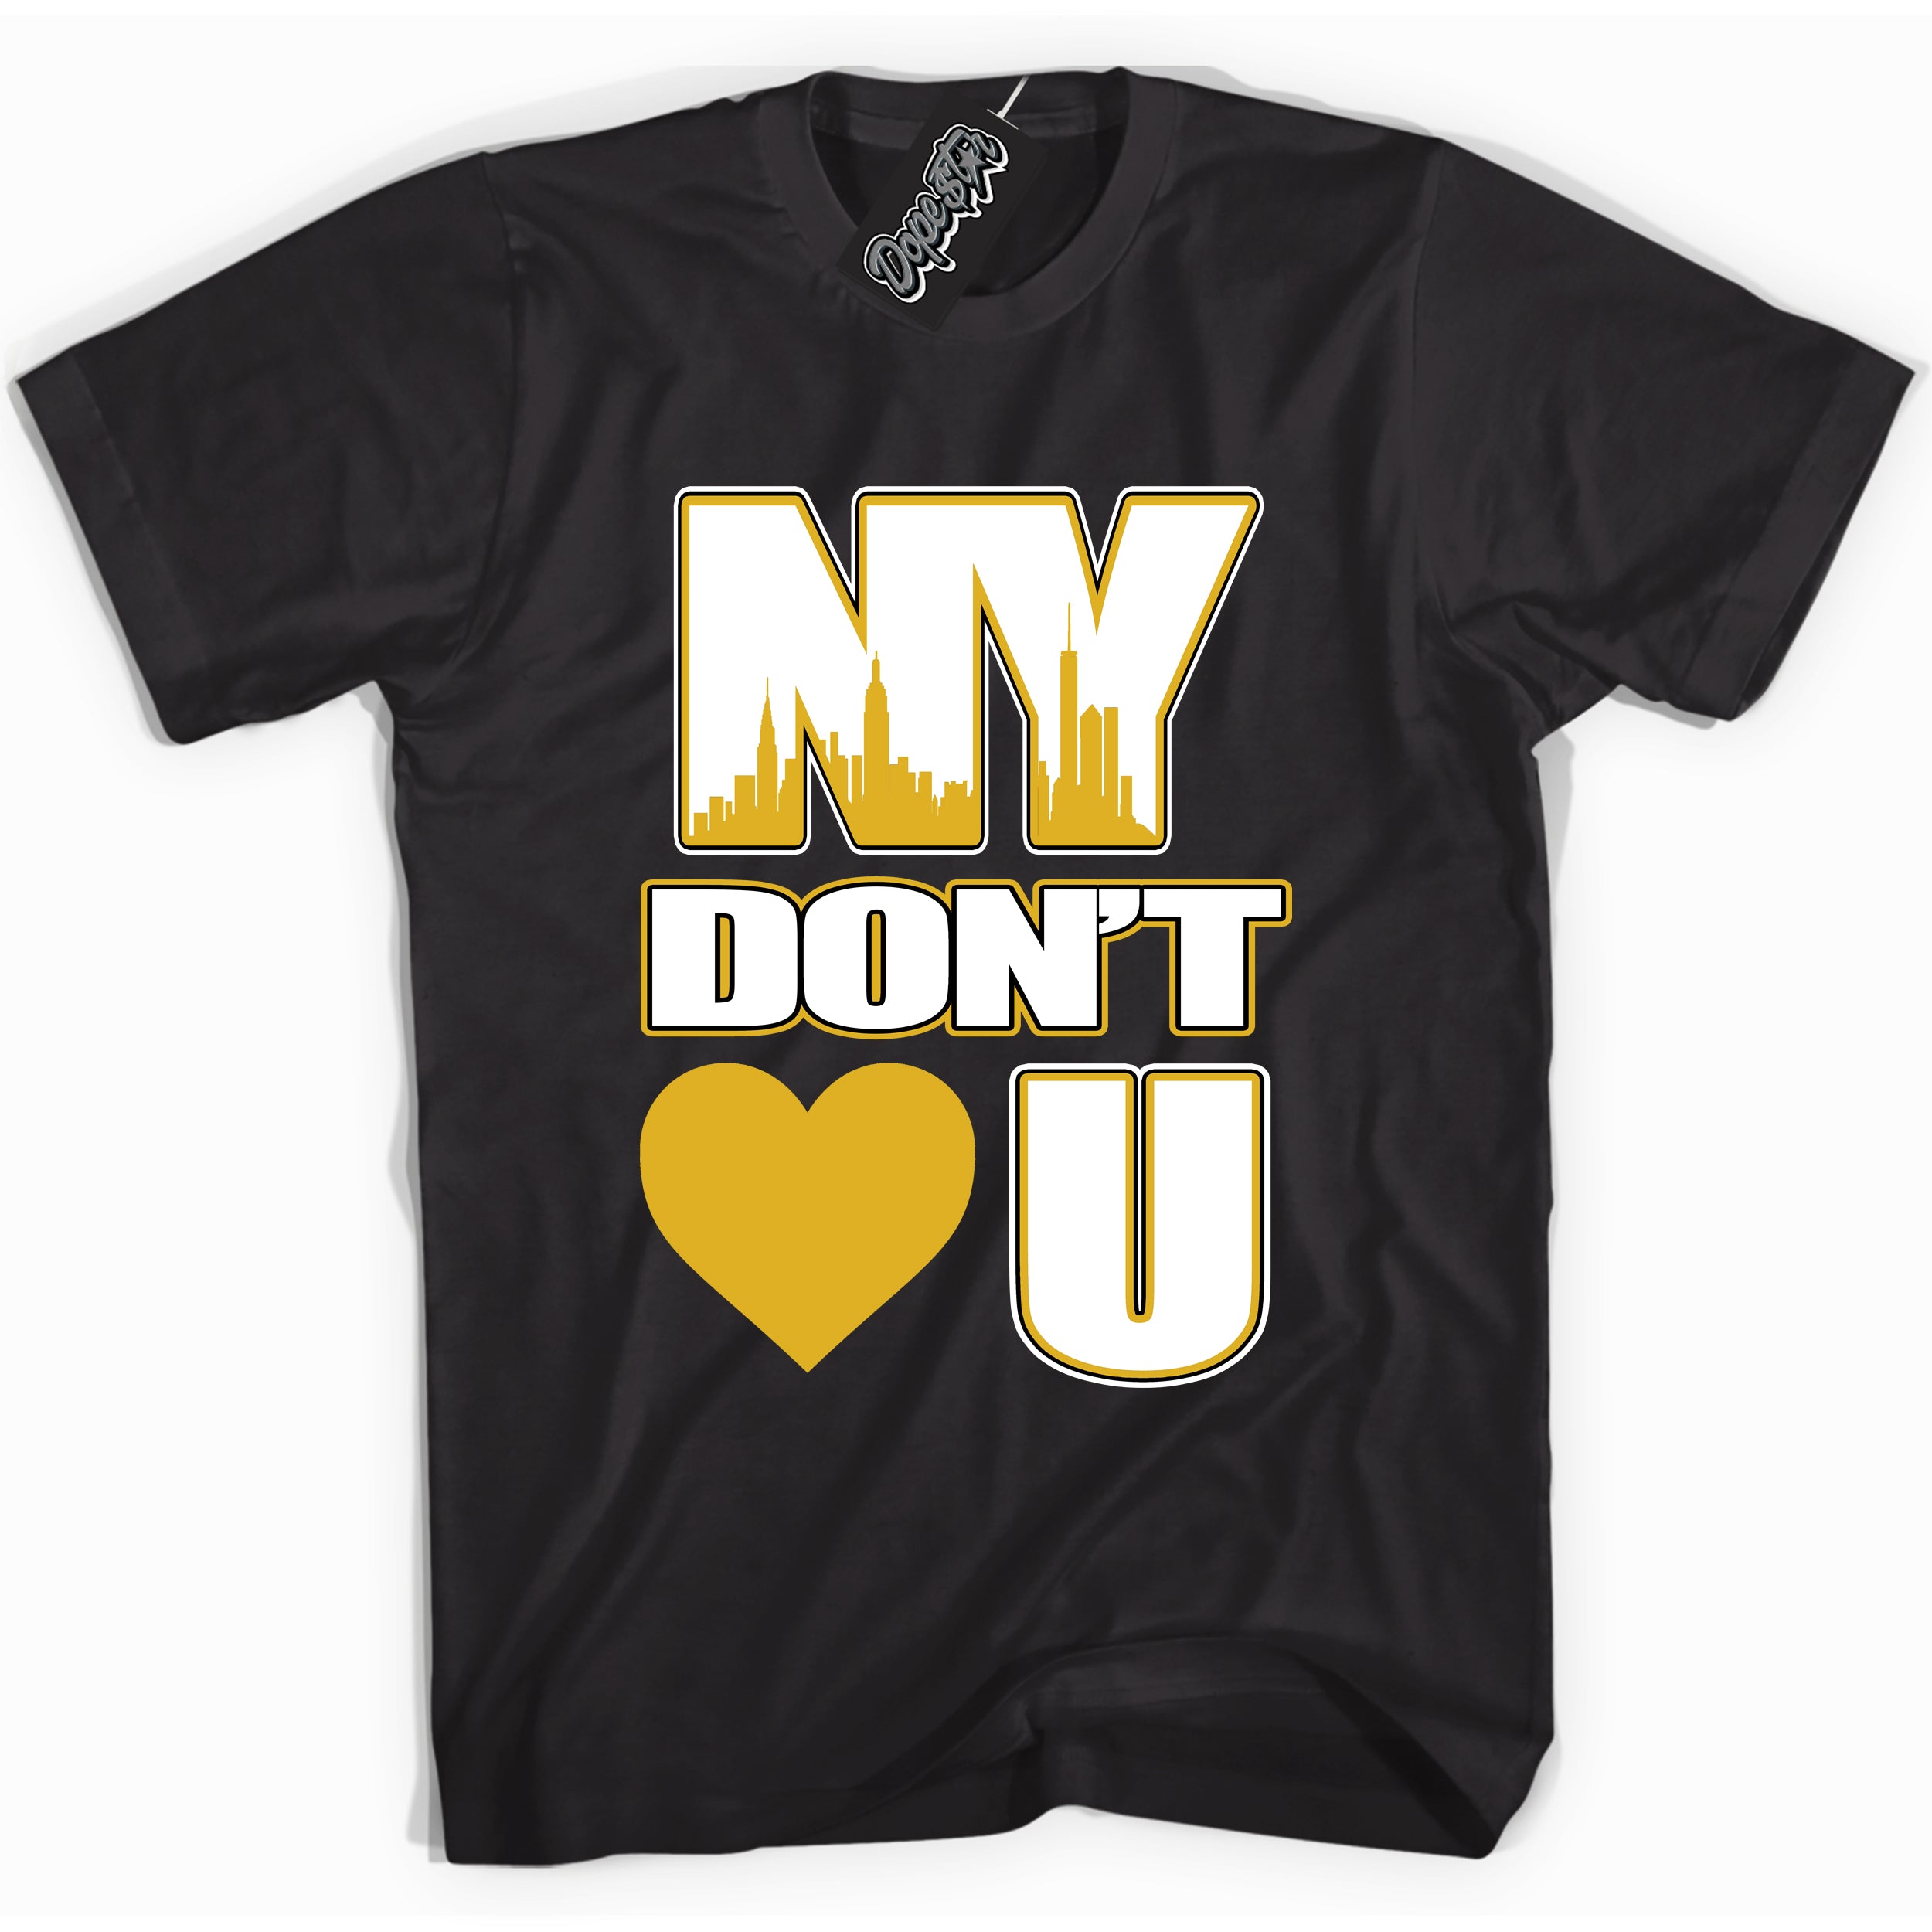 Cool Black Shirt With NY Don’t Love  design That Perfectly Matches YELLOW OCHRE 6s Sneakers.